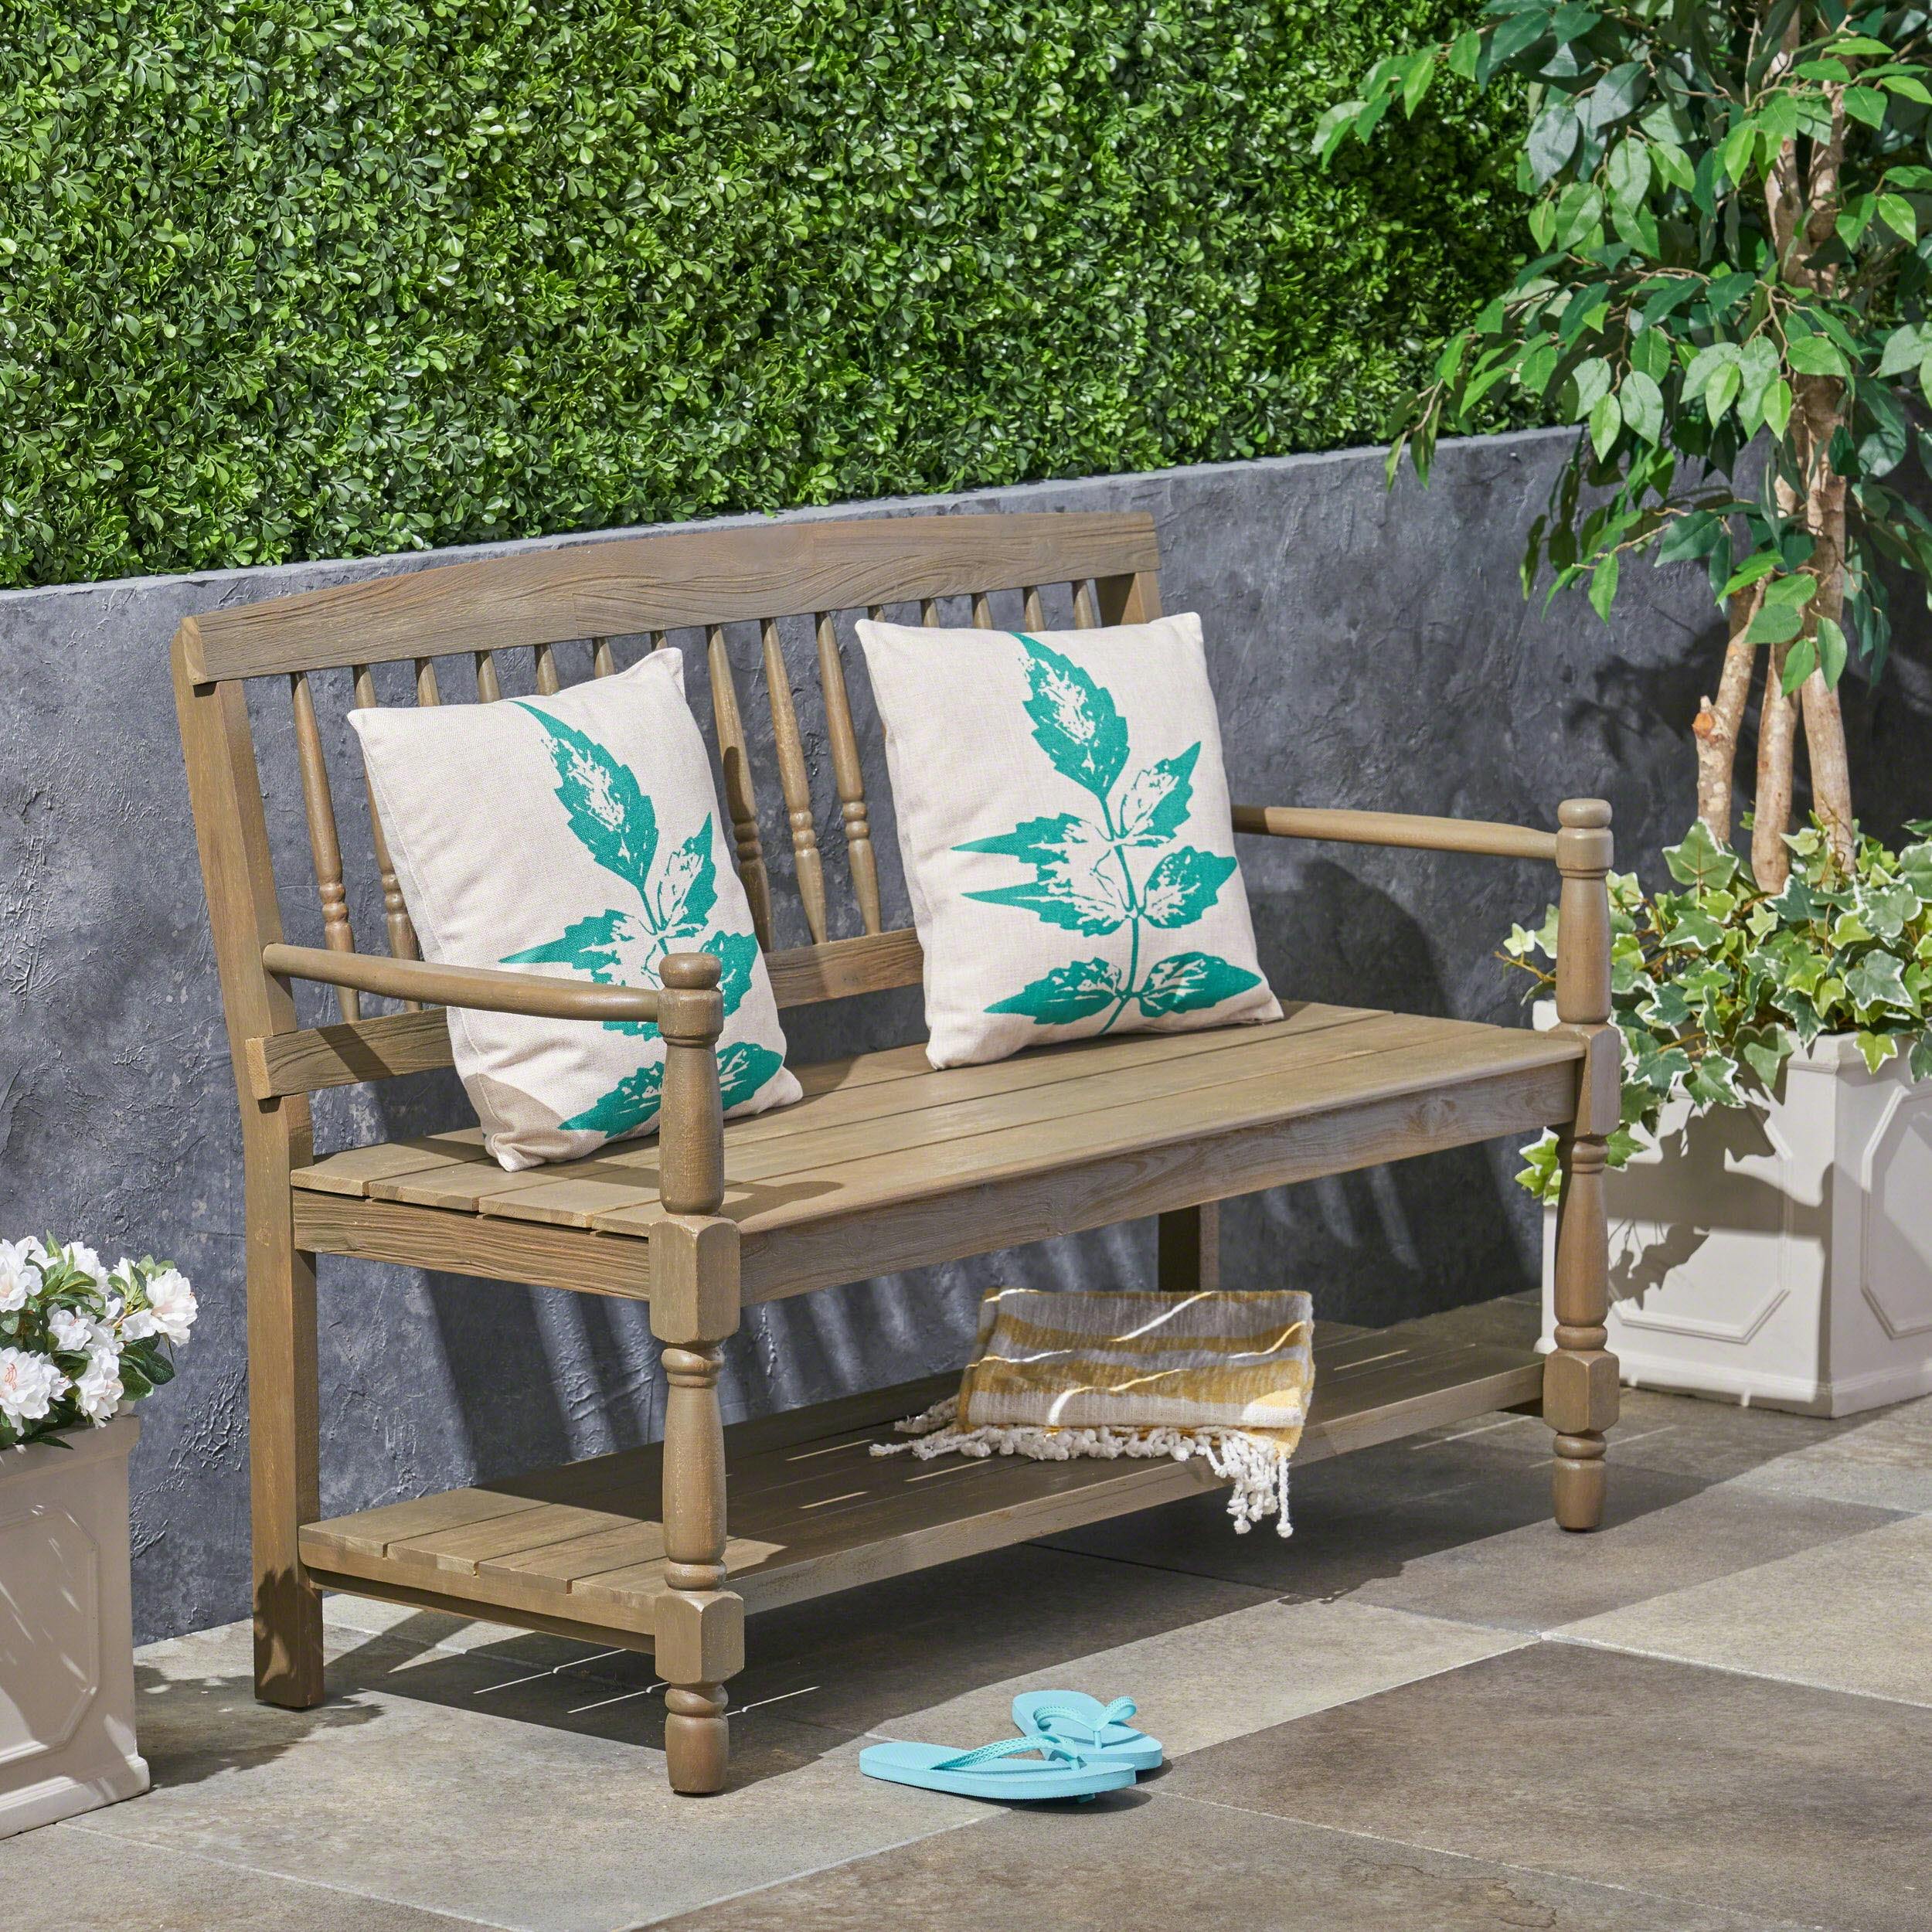 Larry Gray Acacia Wood Outdoor Bench with Shelf